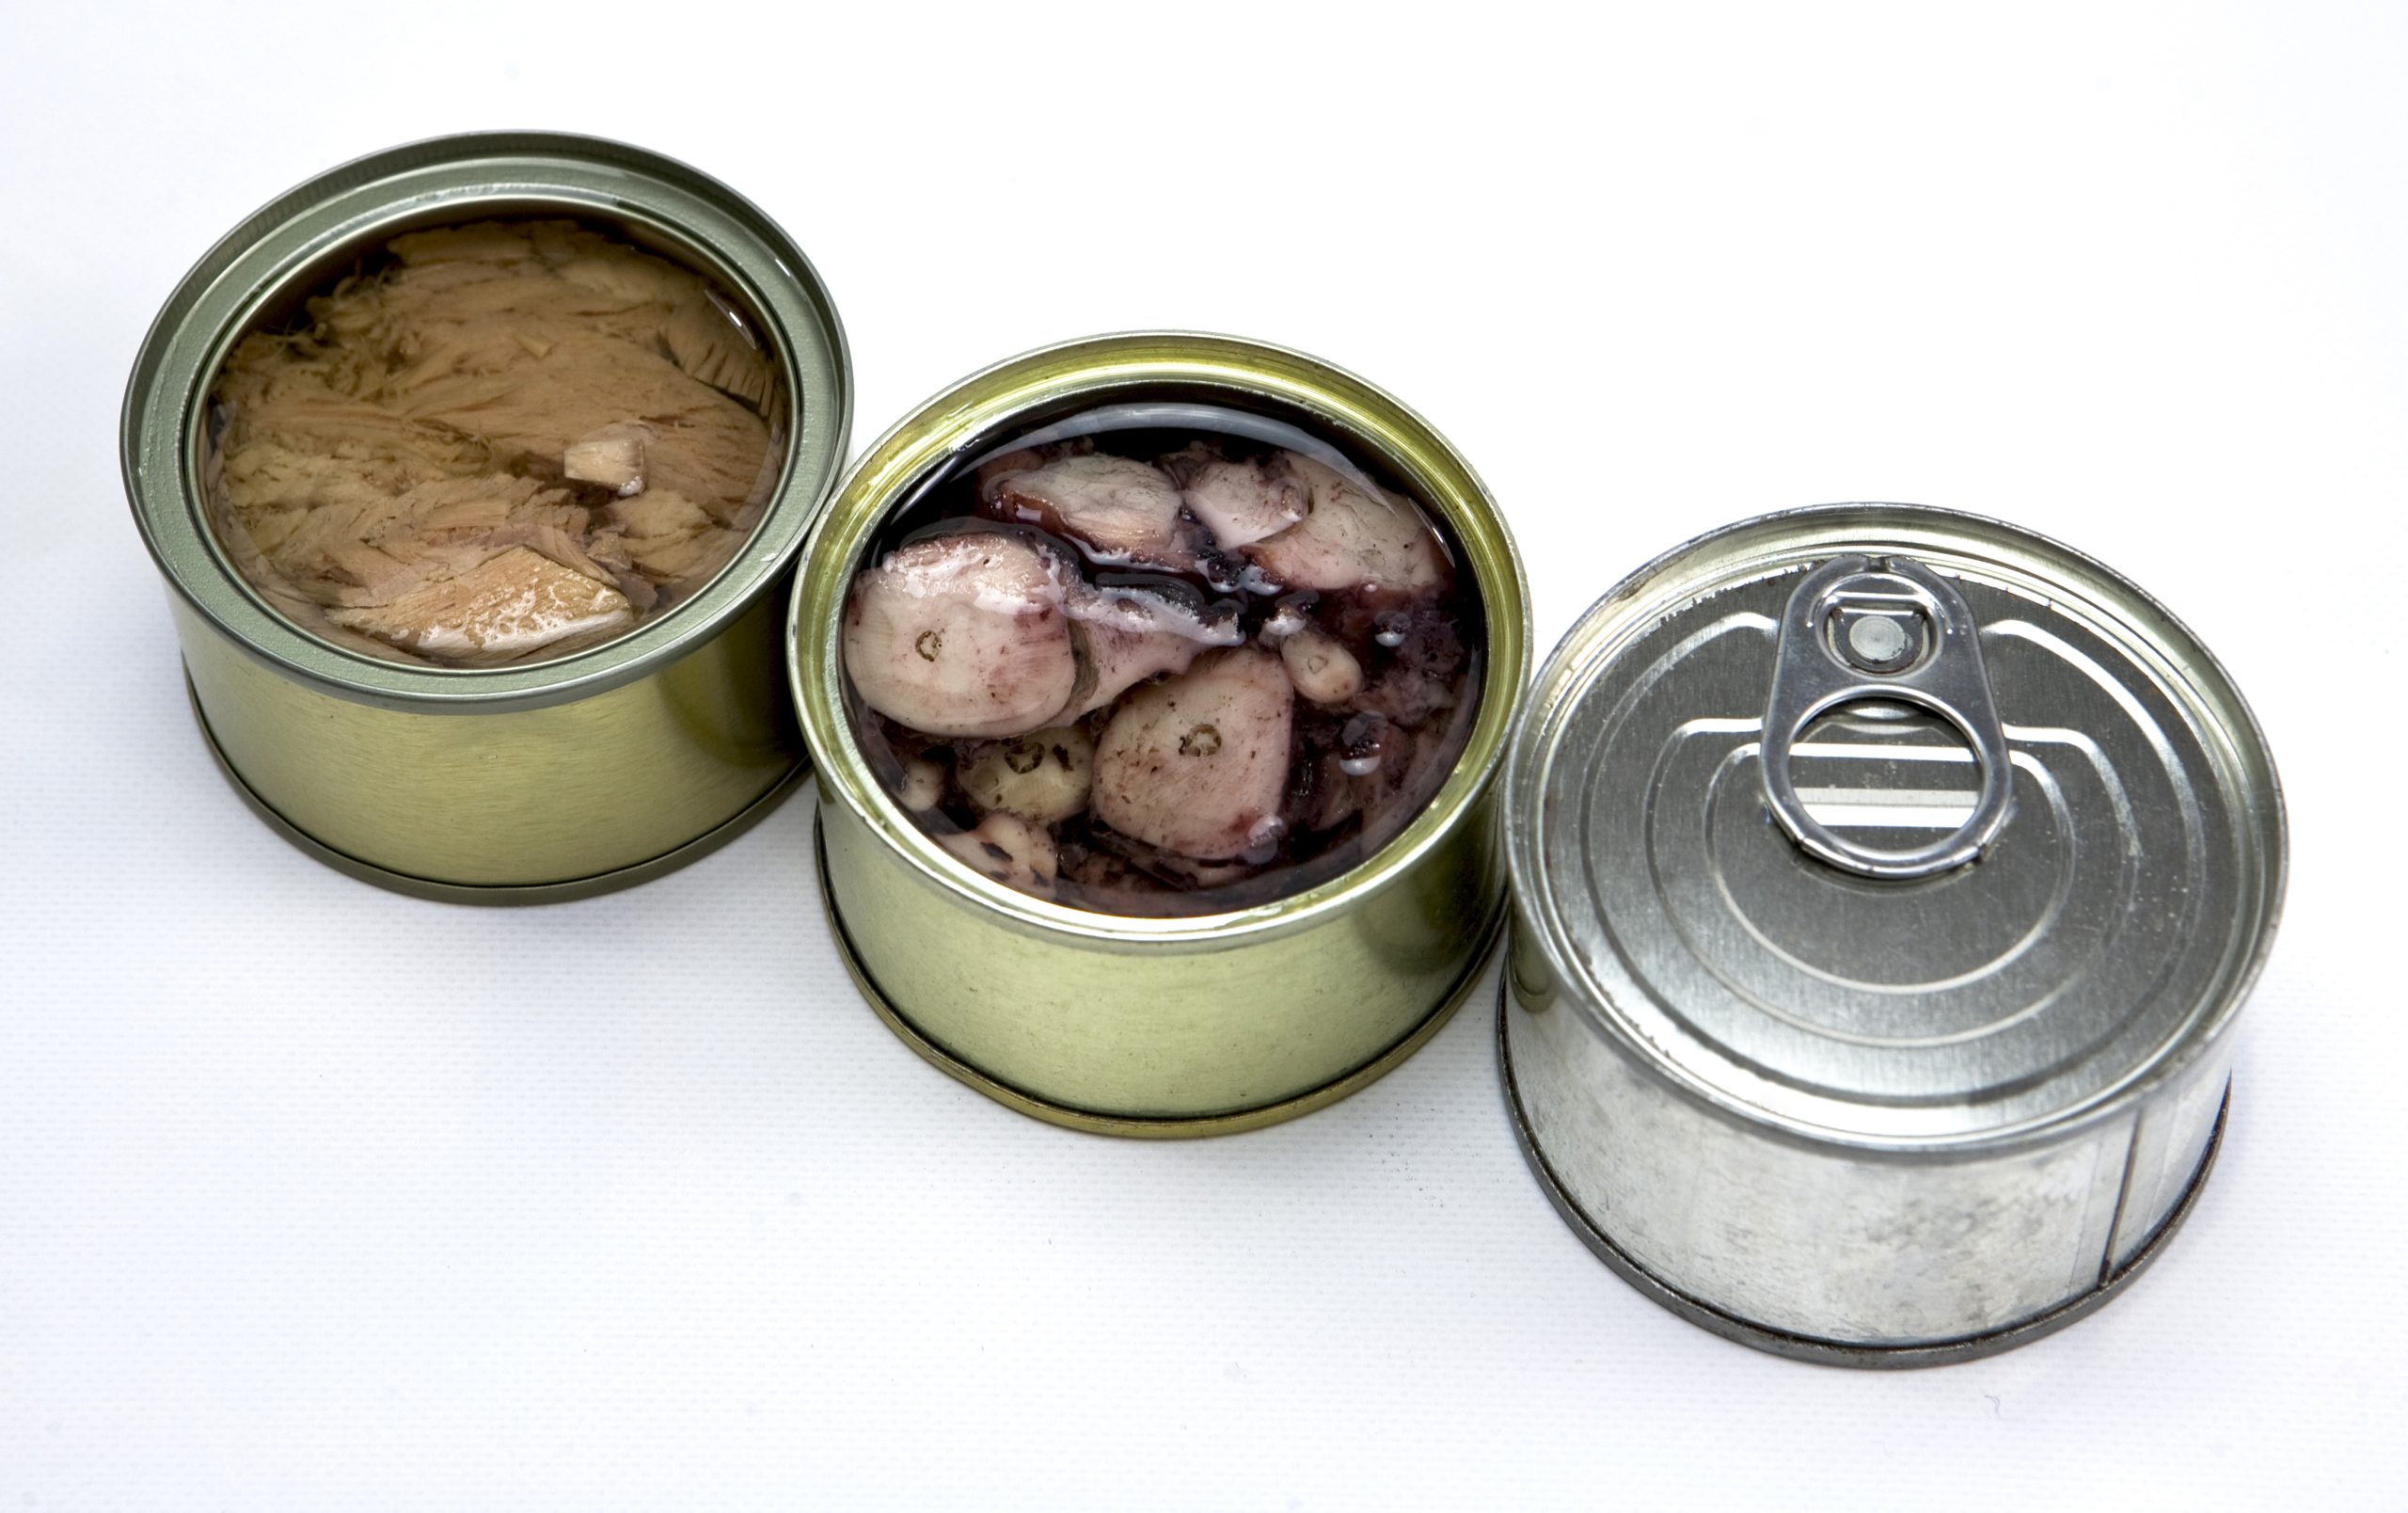 How long does canned fish last